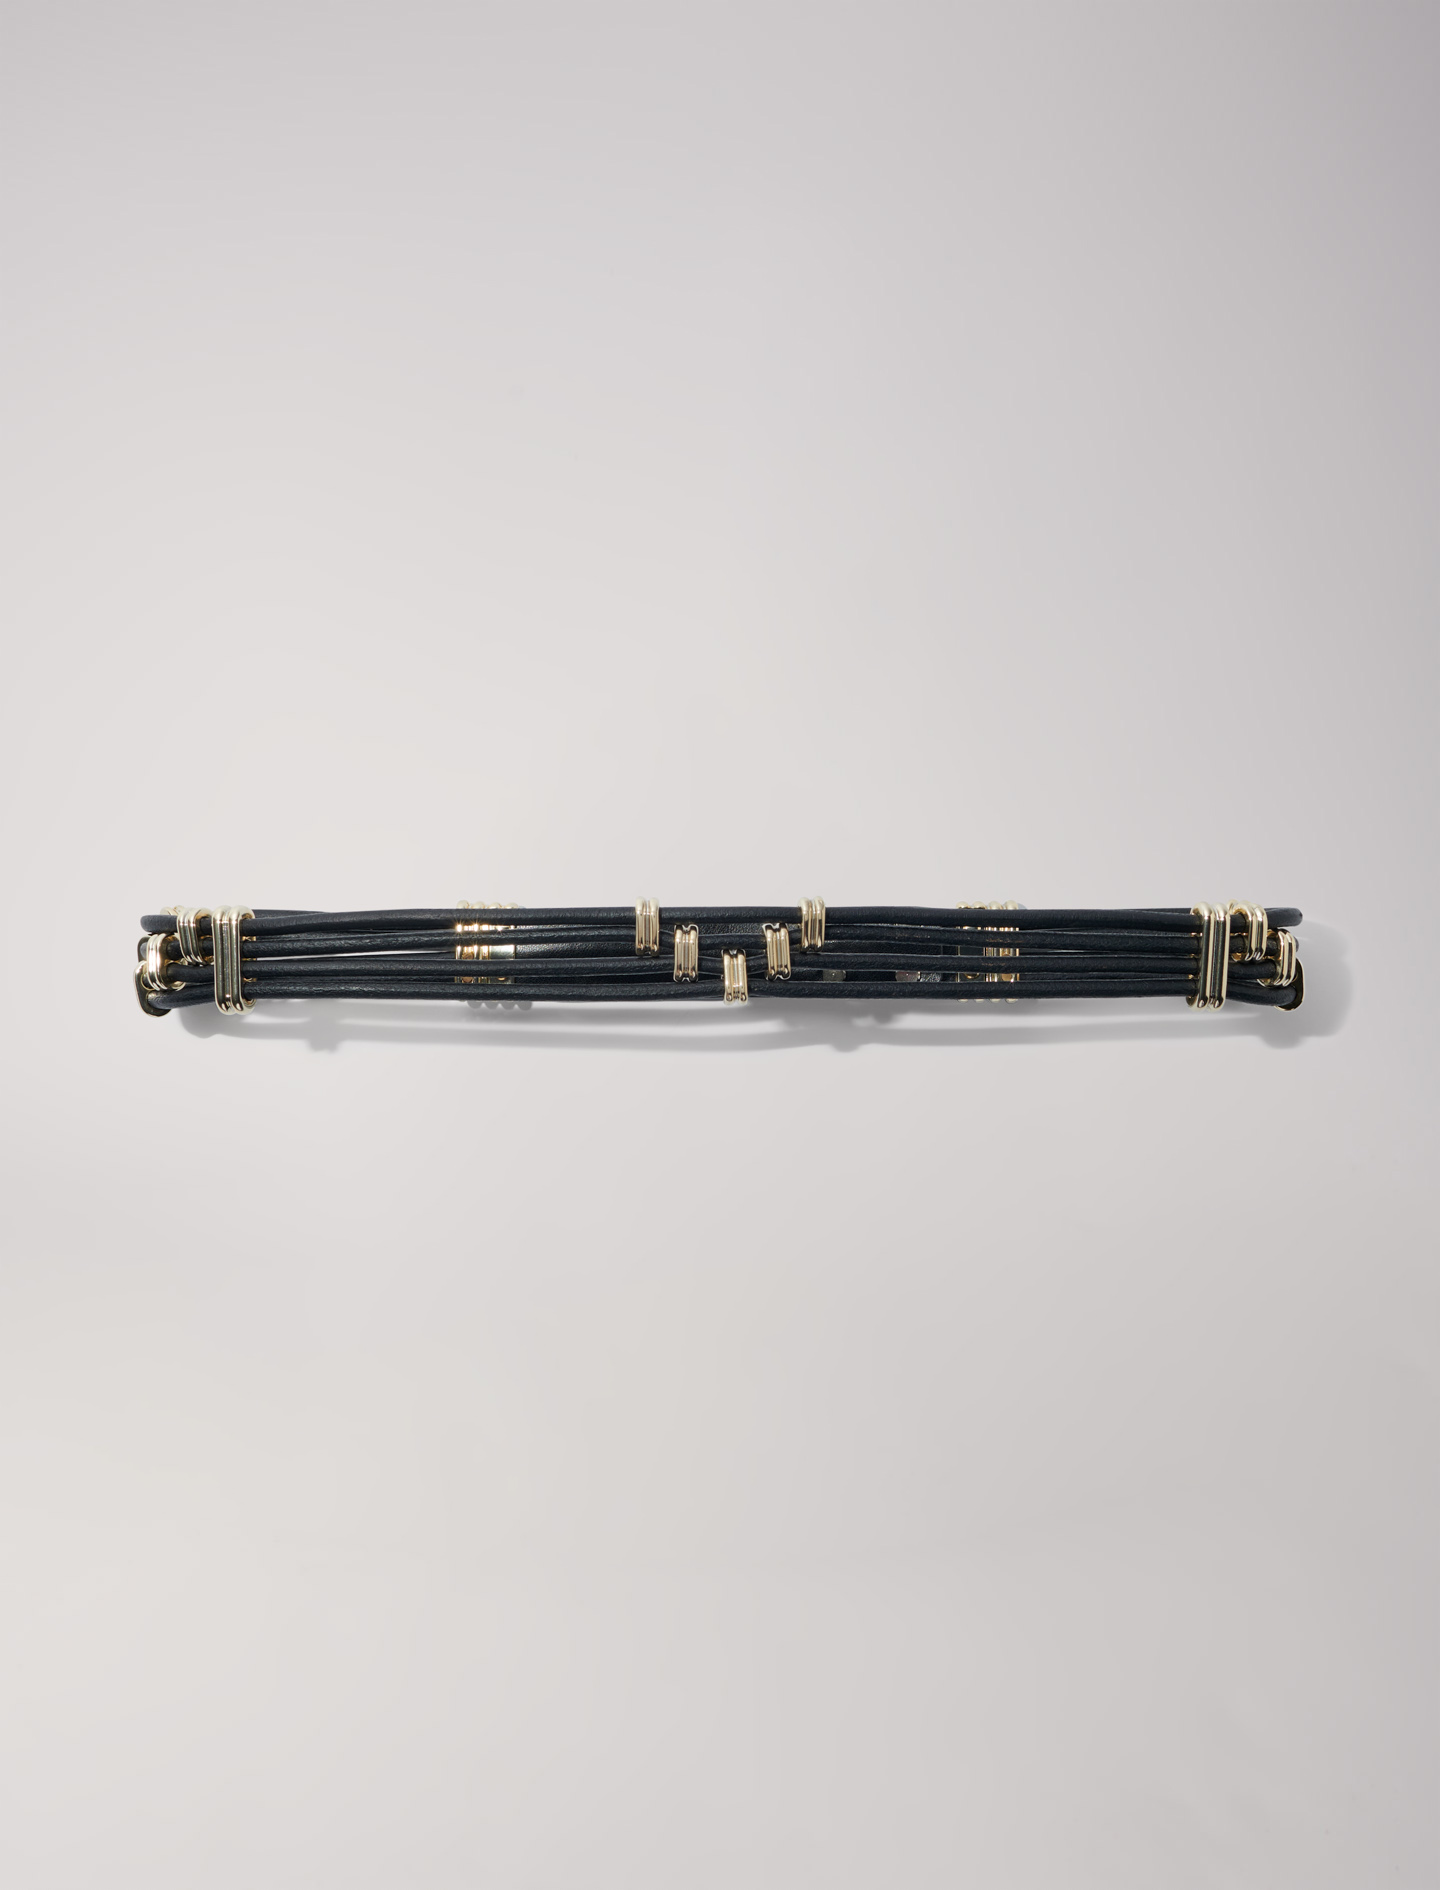 Mixte's polyester, Mixed metal and leather belt for Spring/Summer, size Mixte-Belts-US L / FR 3, in color Black / Black